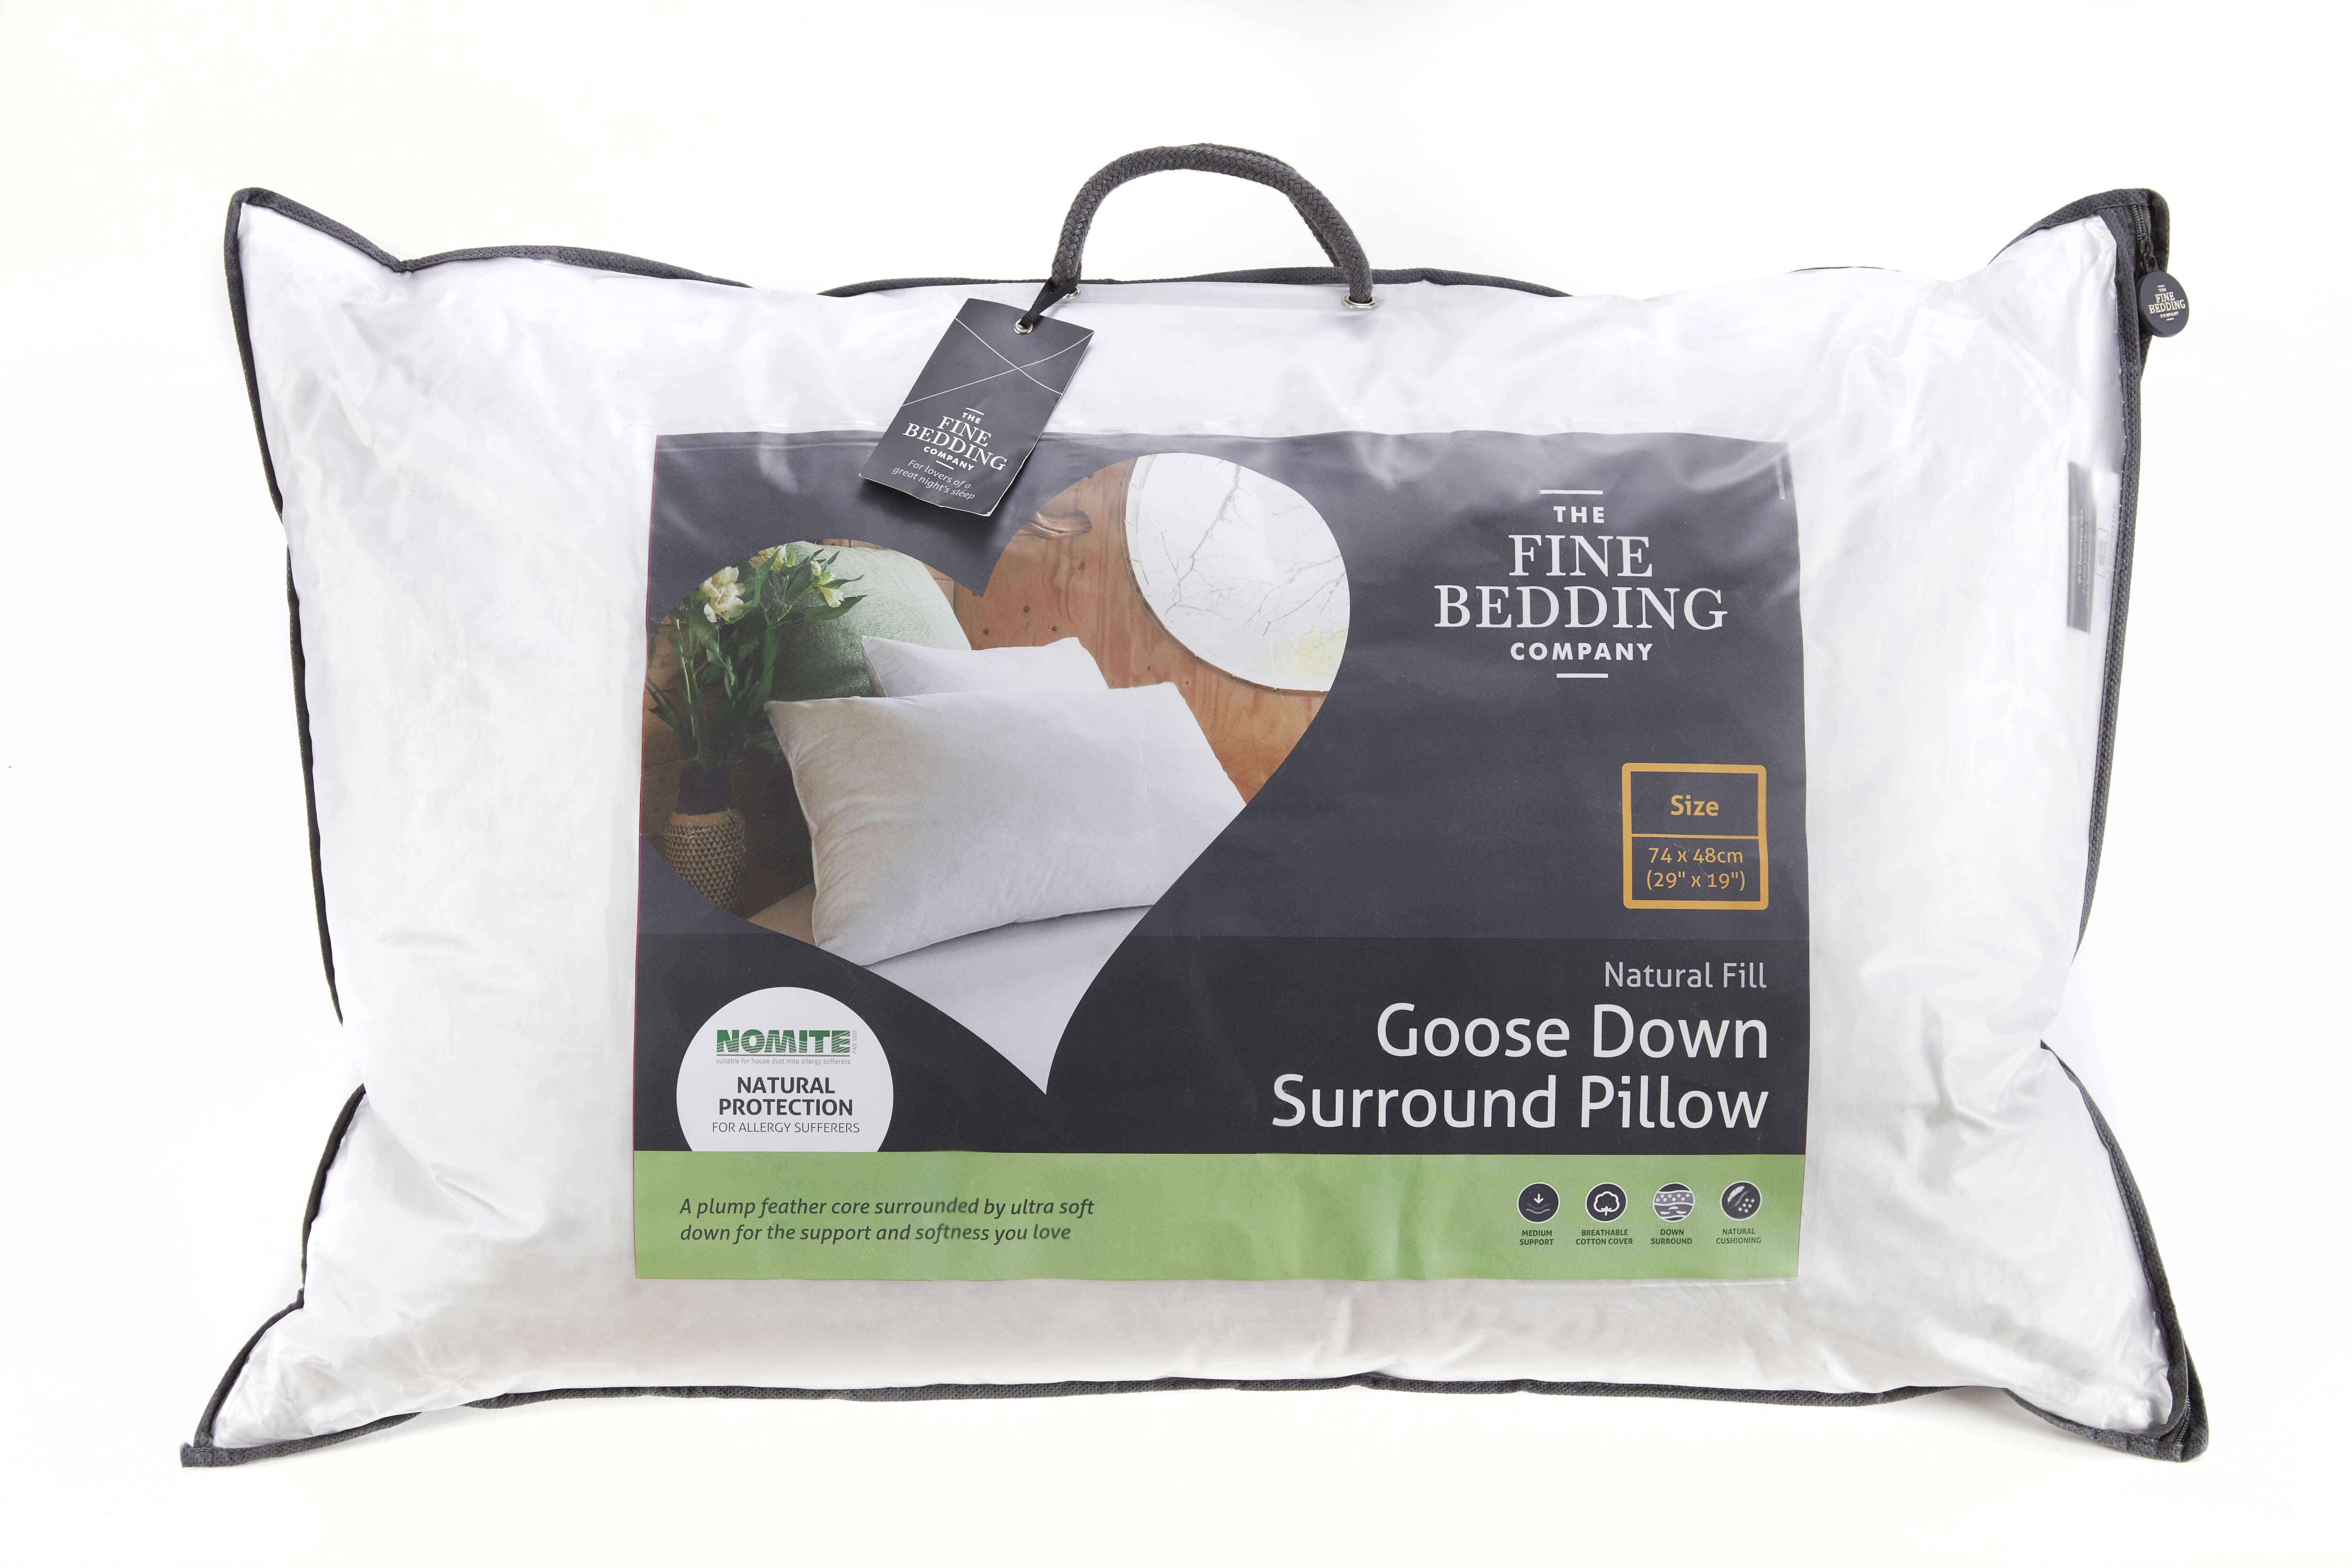 Goose Down Surround Pillow -The Fine Bedding Company